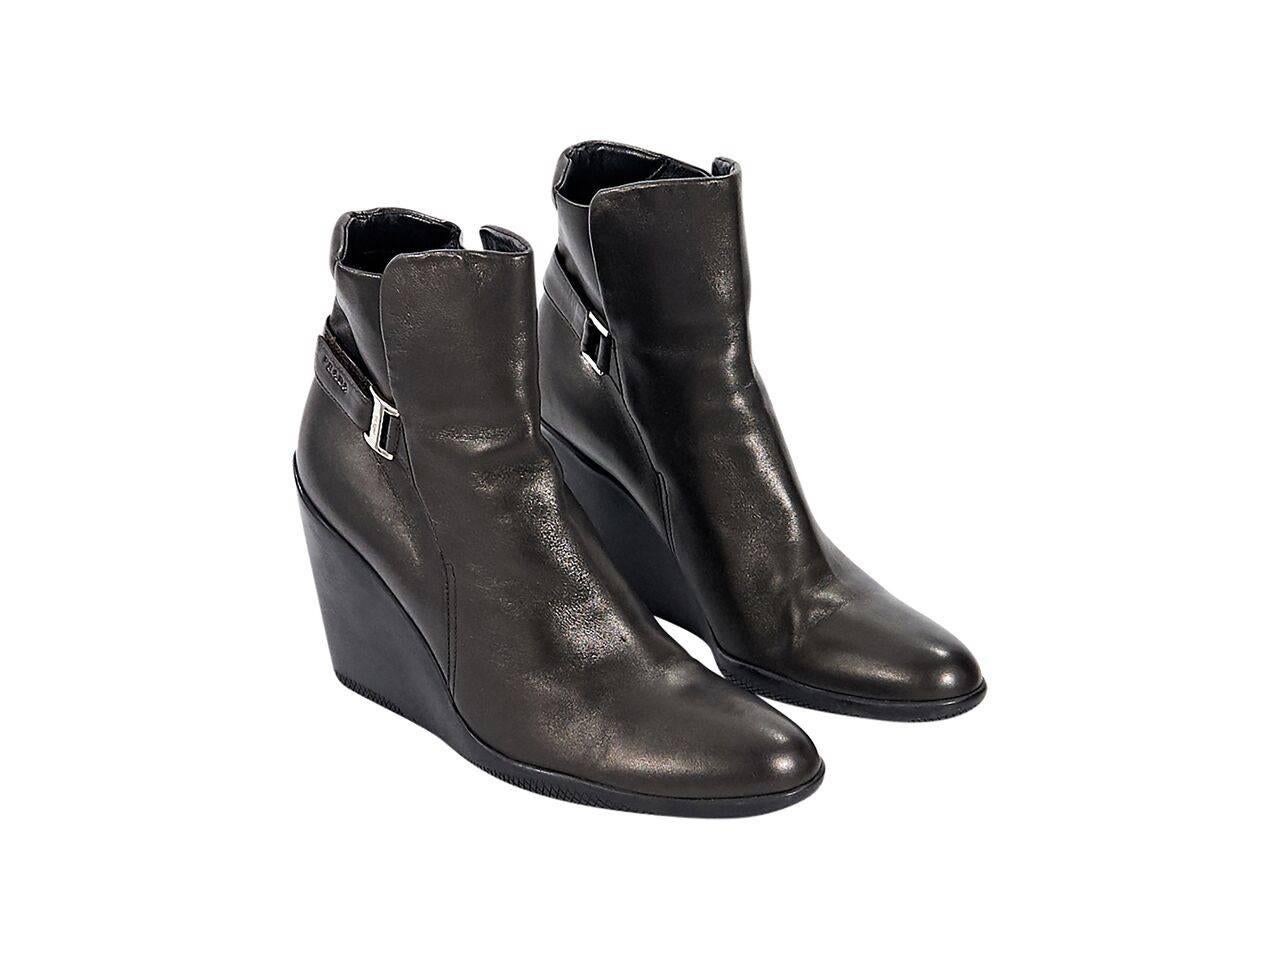 Product details:  Brown leather wedge ankle boots by Prada Sport.  Velcro strap closure.  Round toe.  
Condition: Pre-owned. Very good.
Est. Retail $ 525.00